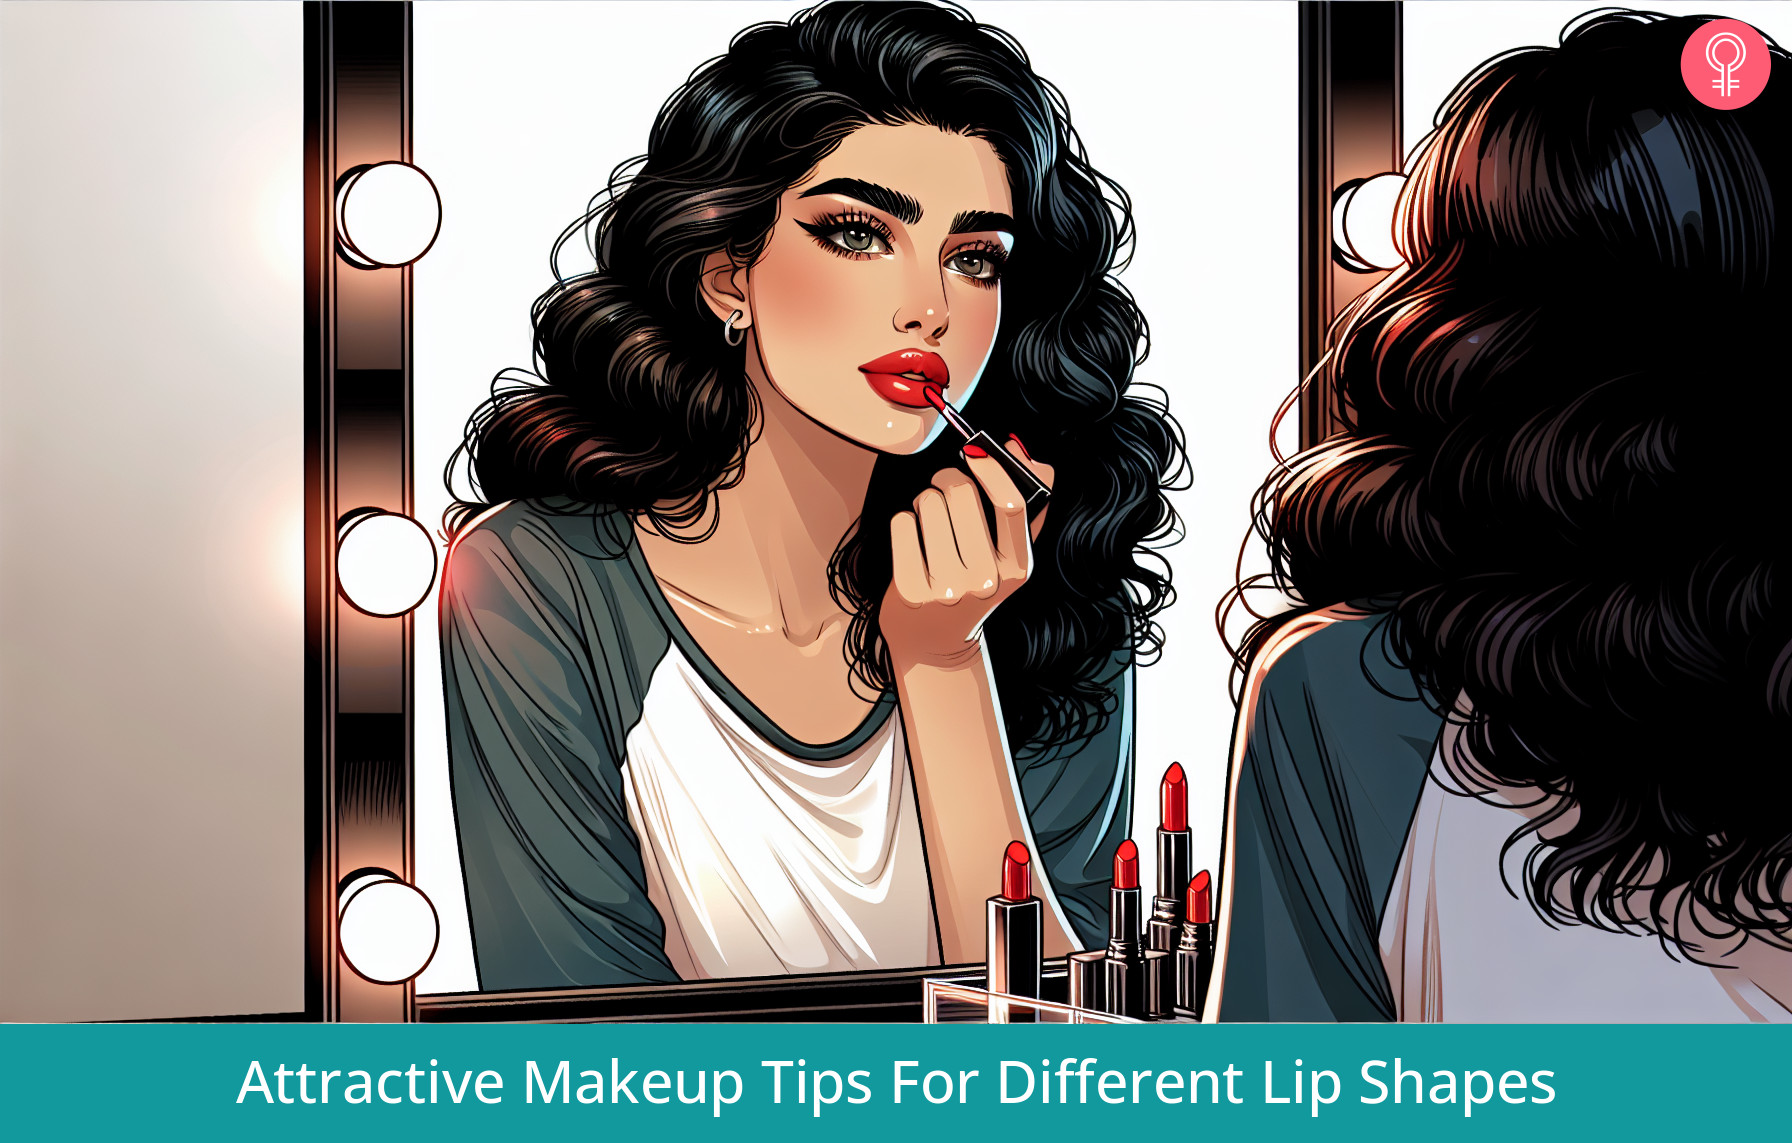 Makeup Tips For Different Lip Shapes